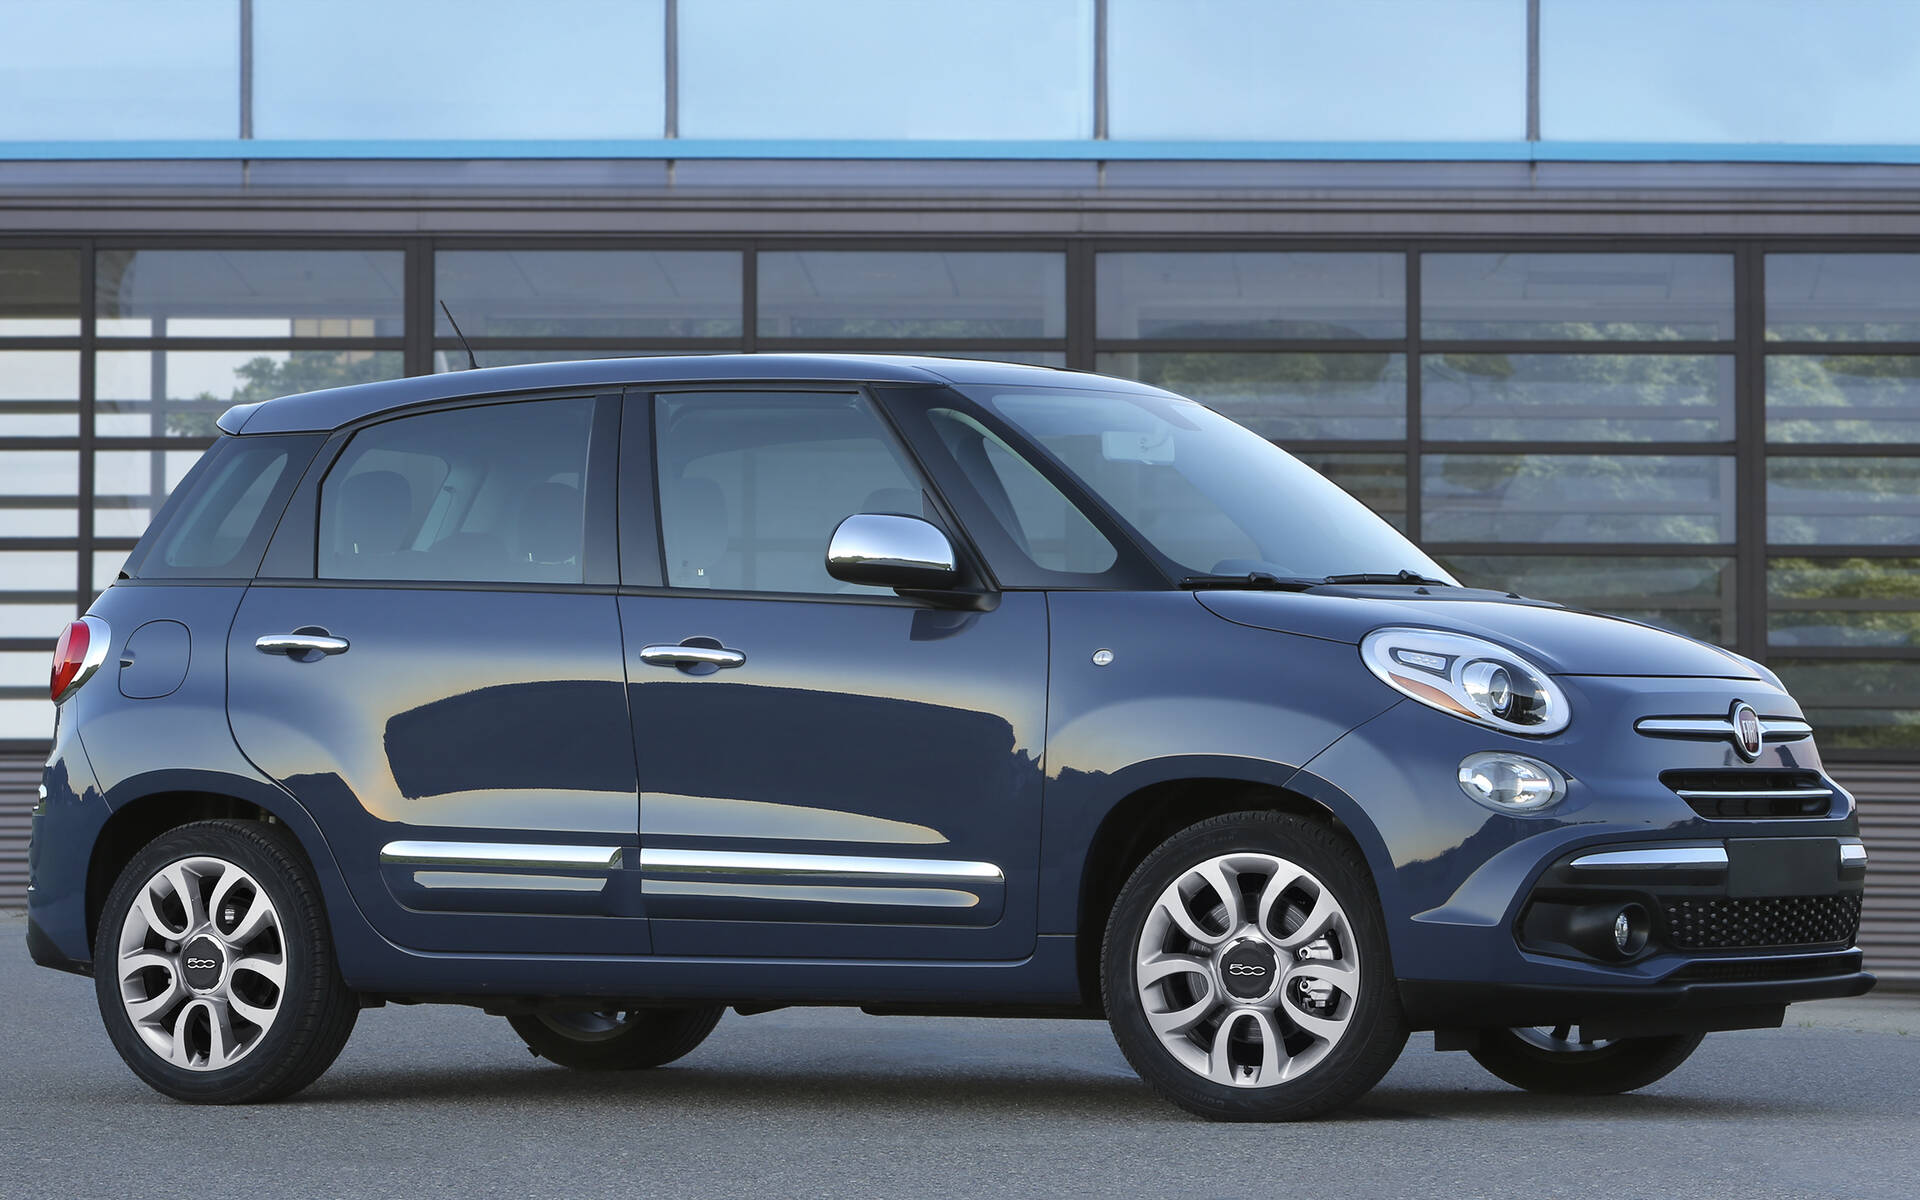 Snikken creatief galerij Fiat 500L, 124 Spider Are Not Coming Back in 2021 - The Car Guide